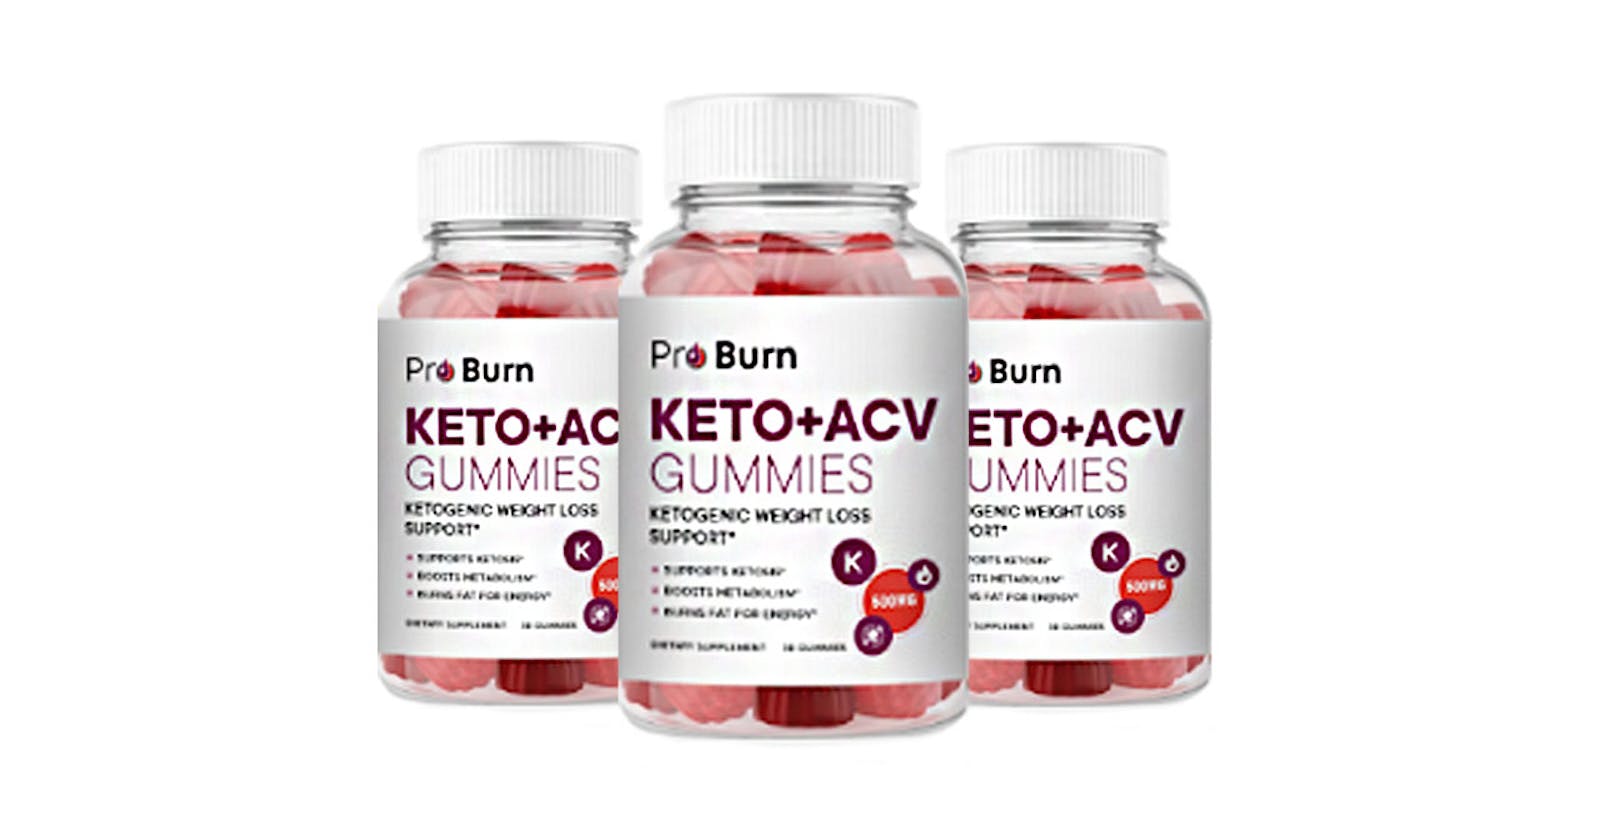 Pro Burn Keto ACV Gummies : Is it Effective in Improving Weight Loss Health?